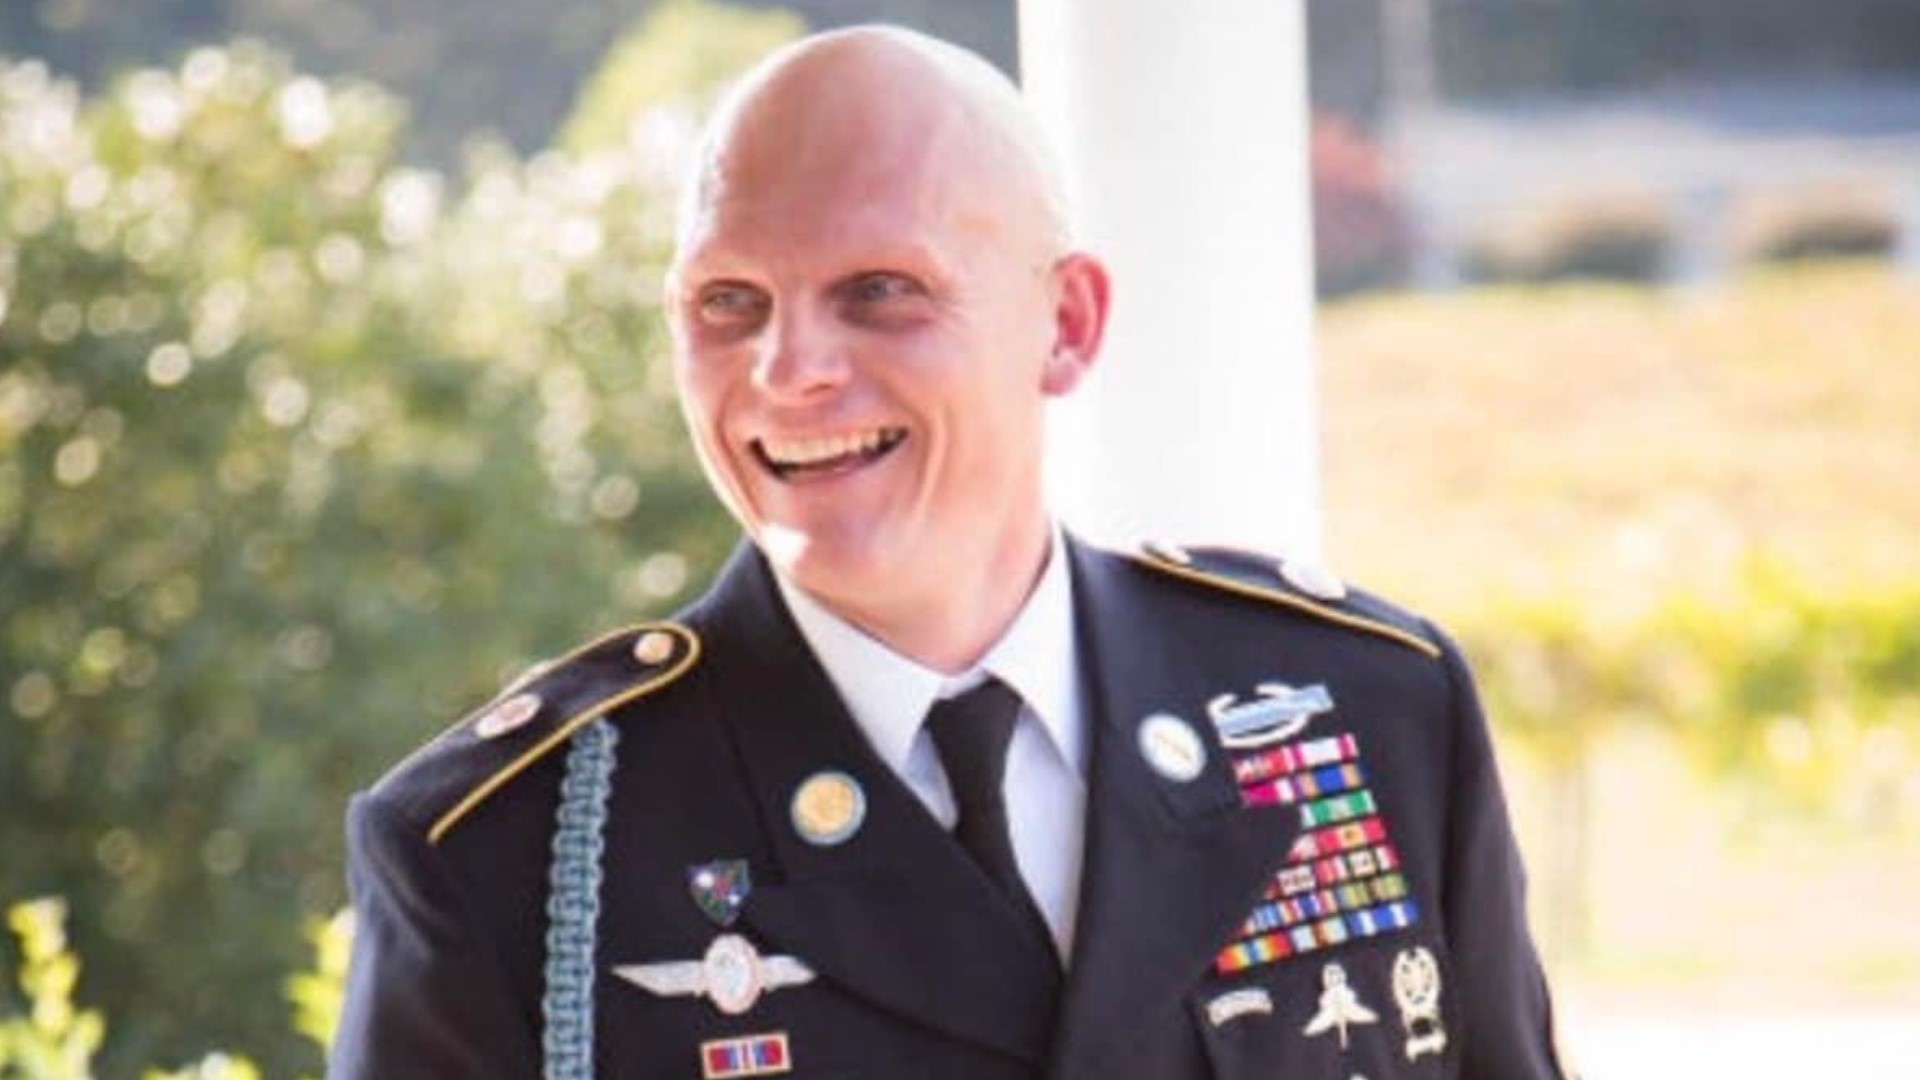 A new reading program at Muldrow Elementary School is honoring the life and sacrifice of 1994 graduate and U.S. Army Master Sergeant Josh Wheeler.